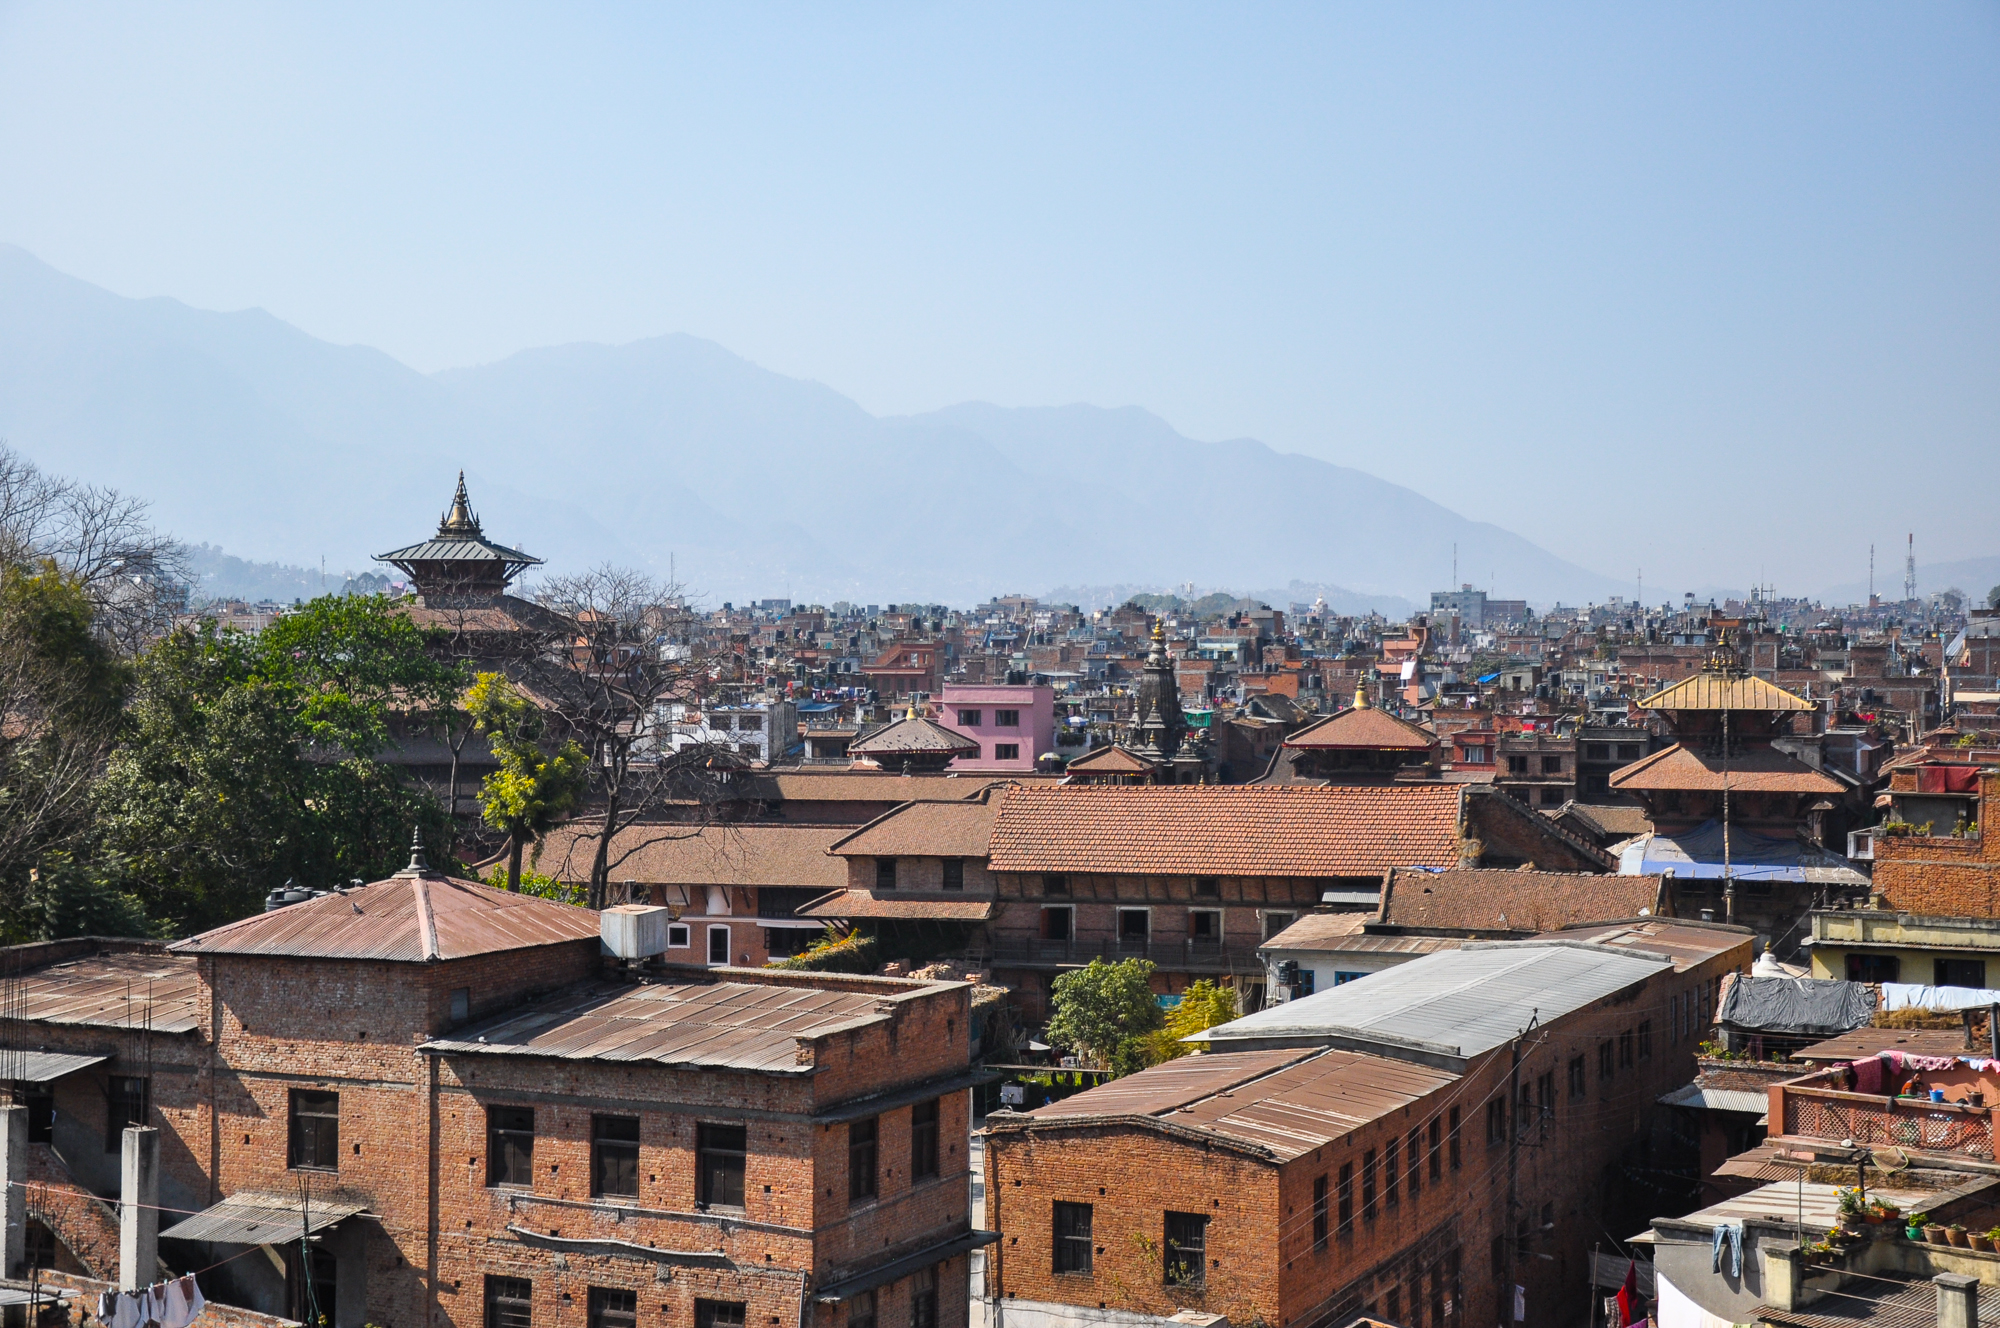 View of Durbar Square from the roof terrace